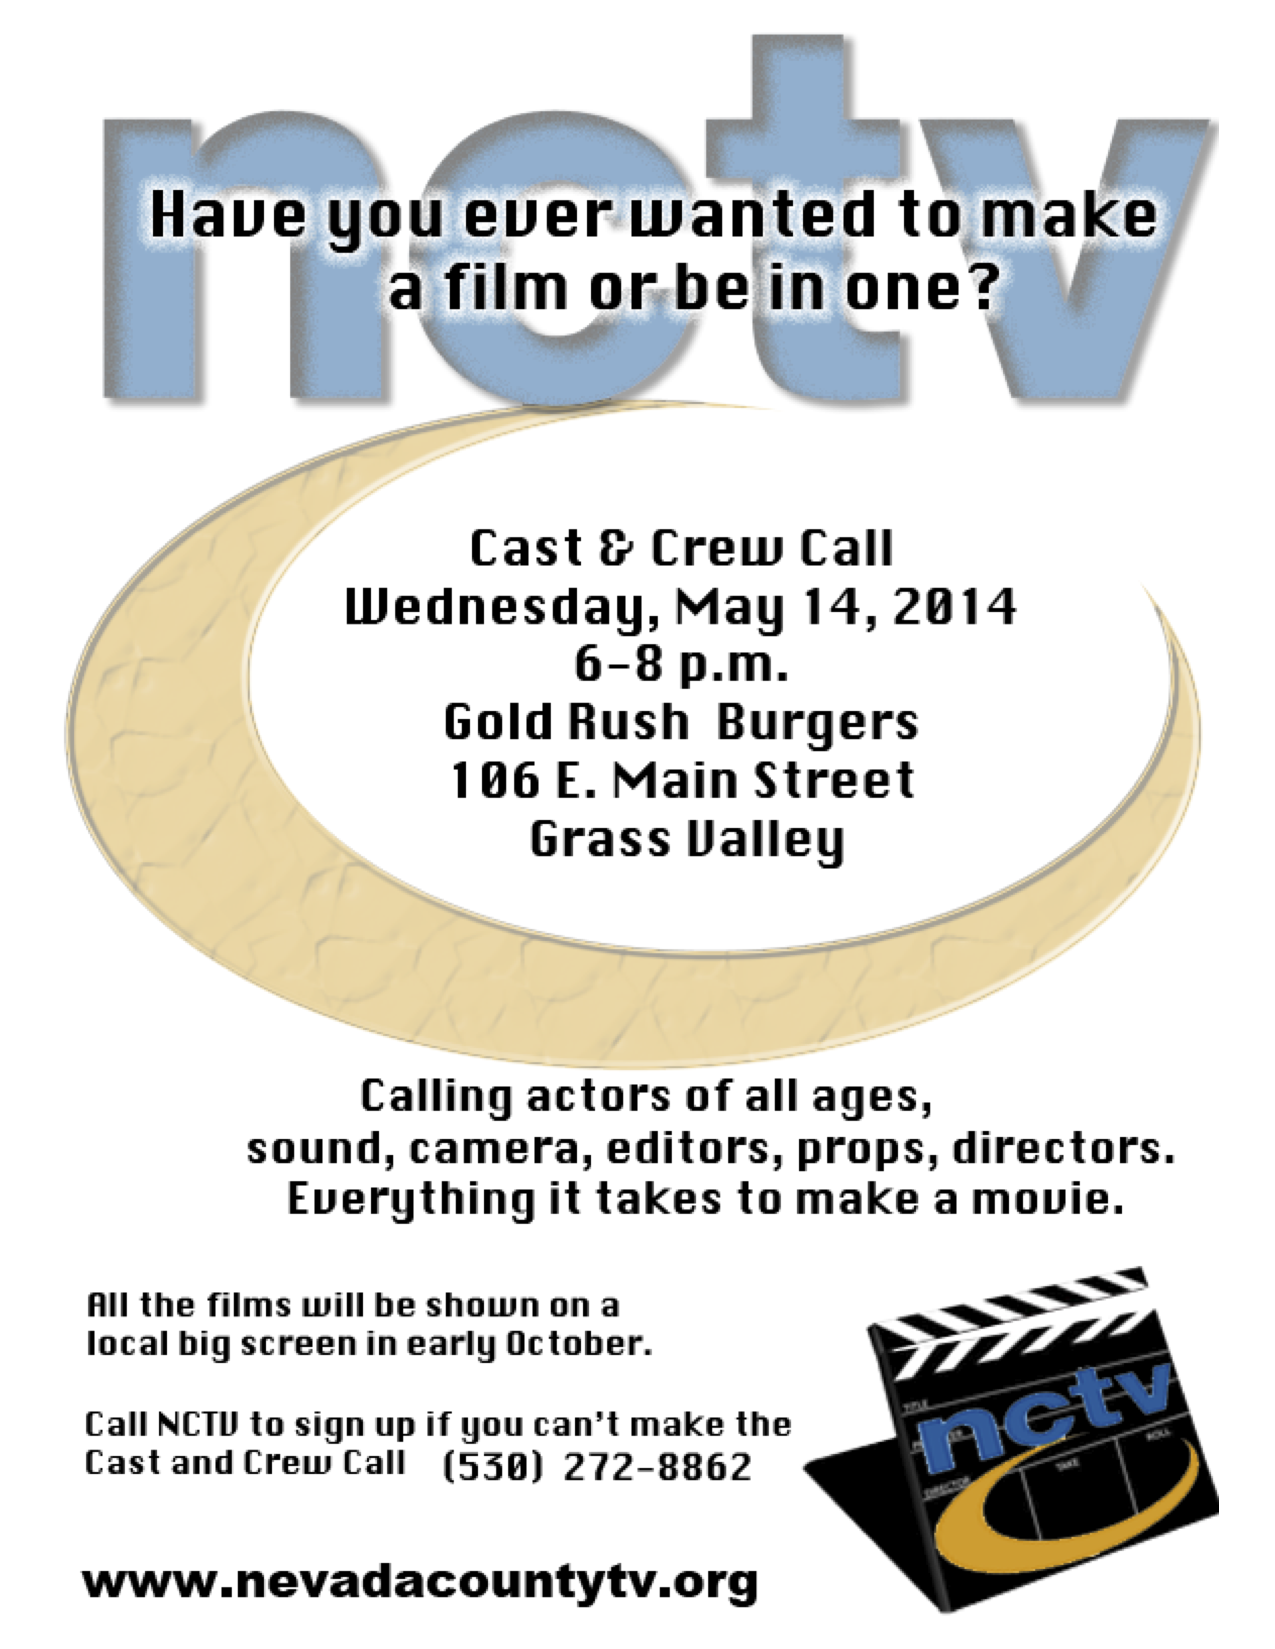 Cast and Crew Call flyer.